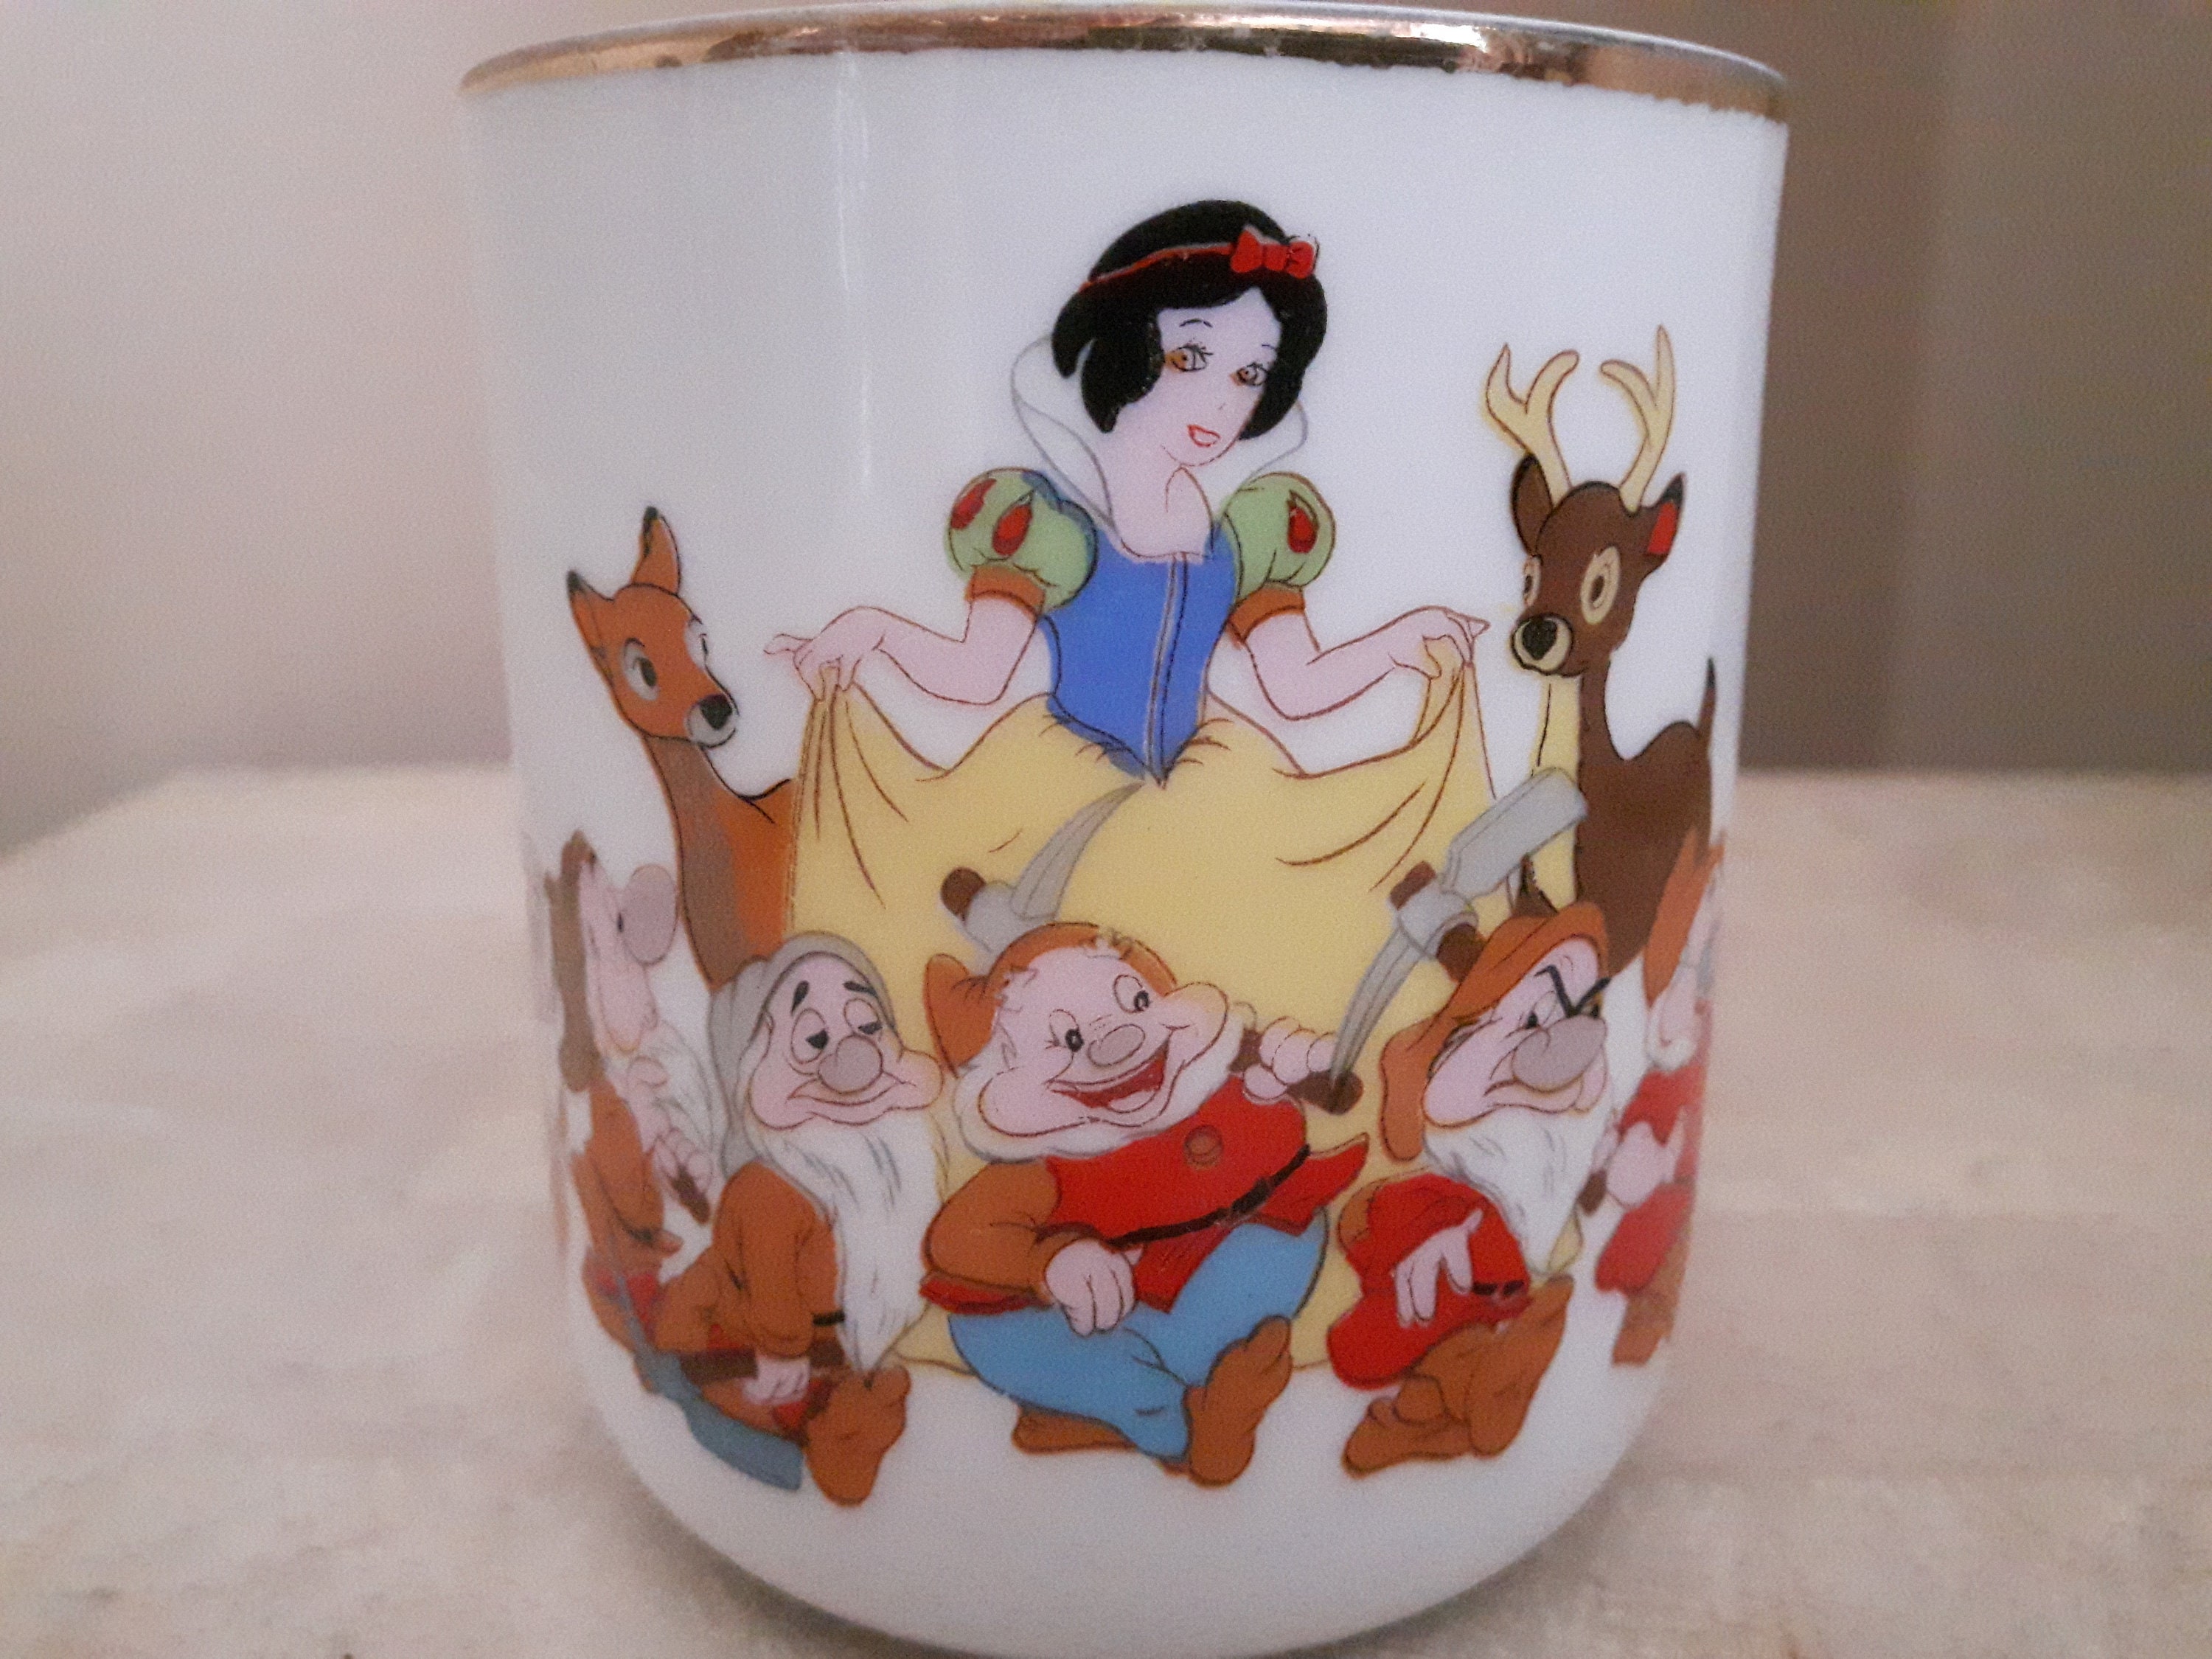 Vintage , Set of 4 Disney Mugs, 1960's,japan, Disney Characters, Coffee  Cups, Snow White, Pinocchio, Dumbo, Lady and the Tramp, Aristocats 